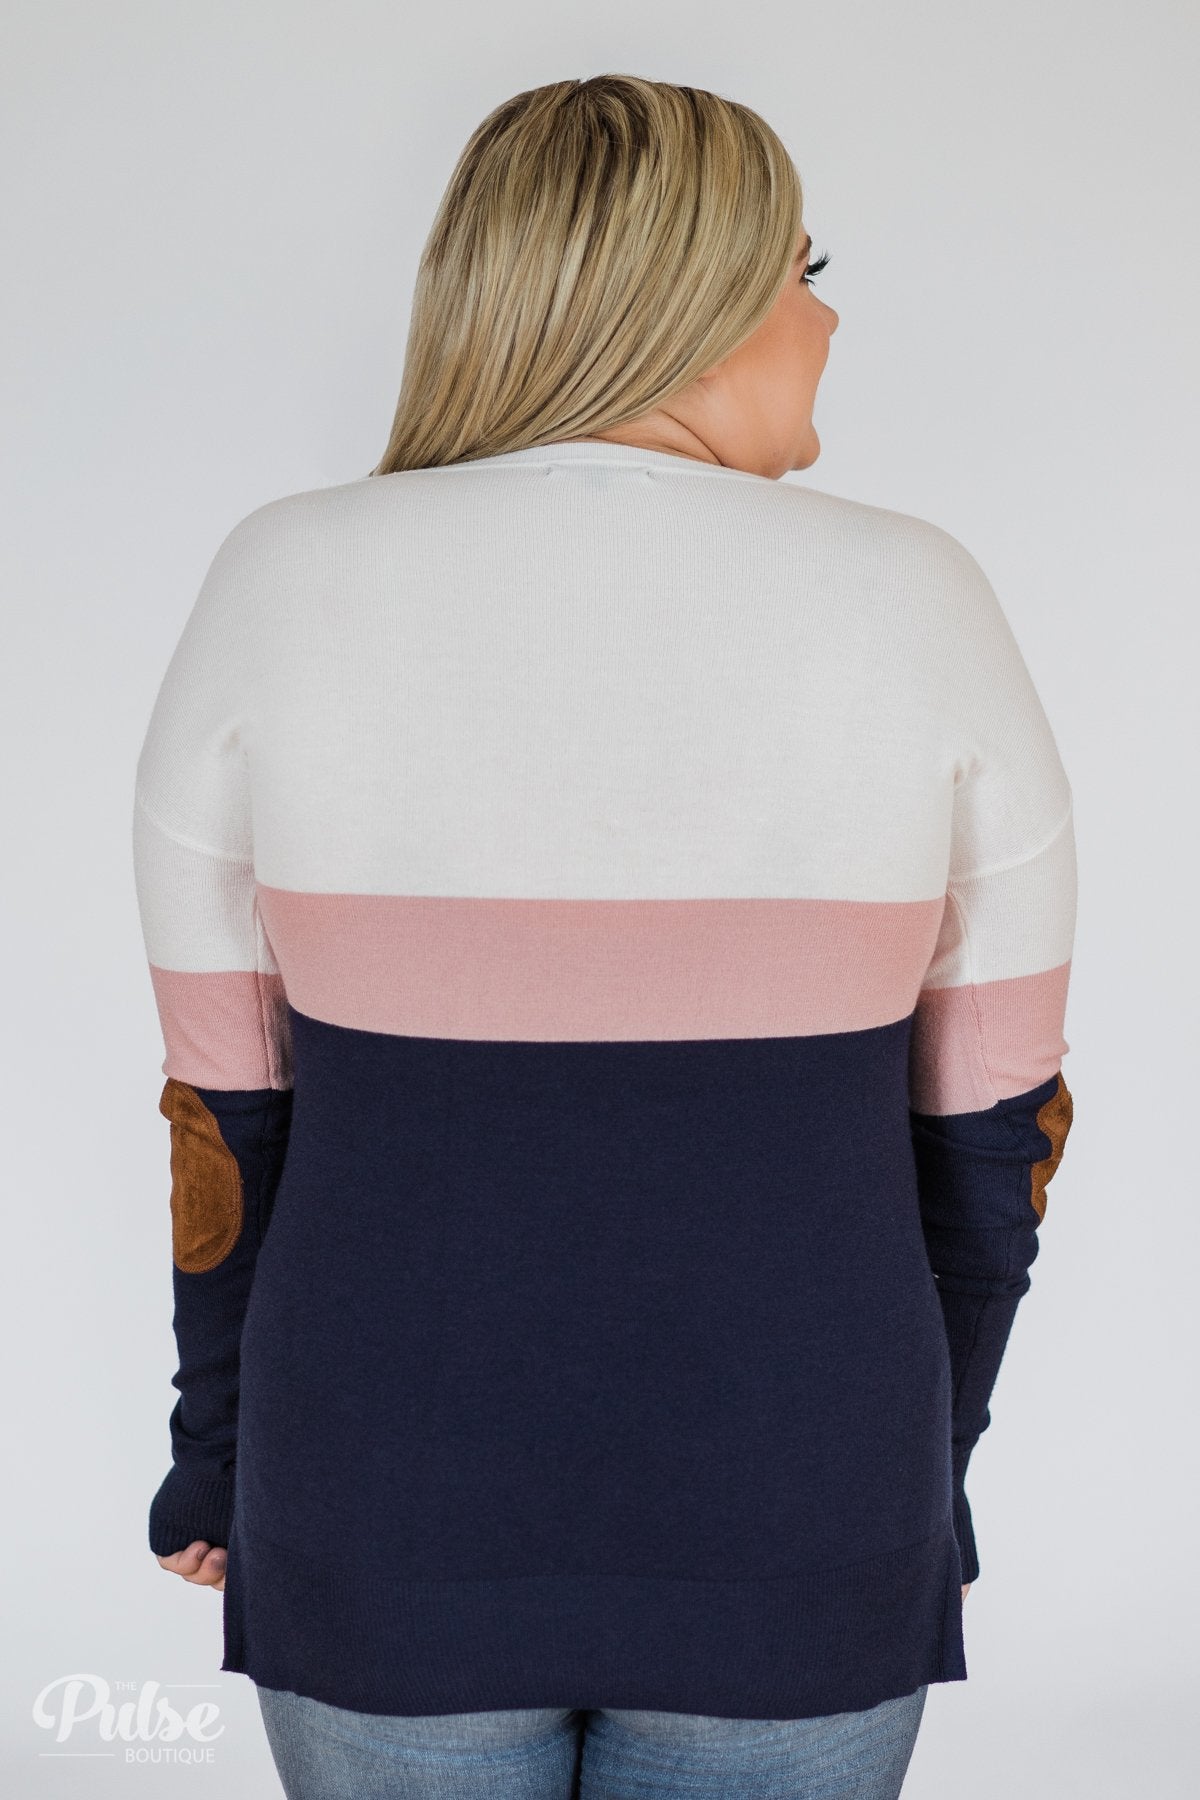 Adore You Color Block Sweater- Navy & Pink